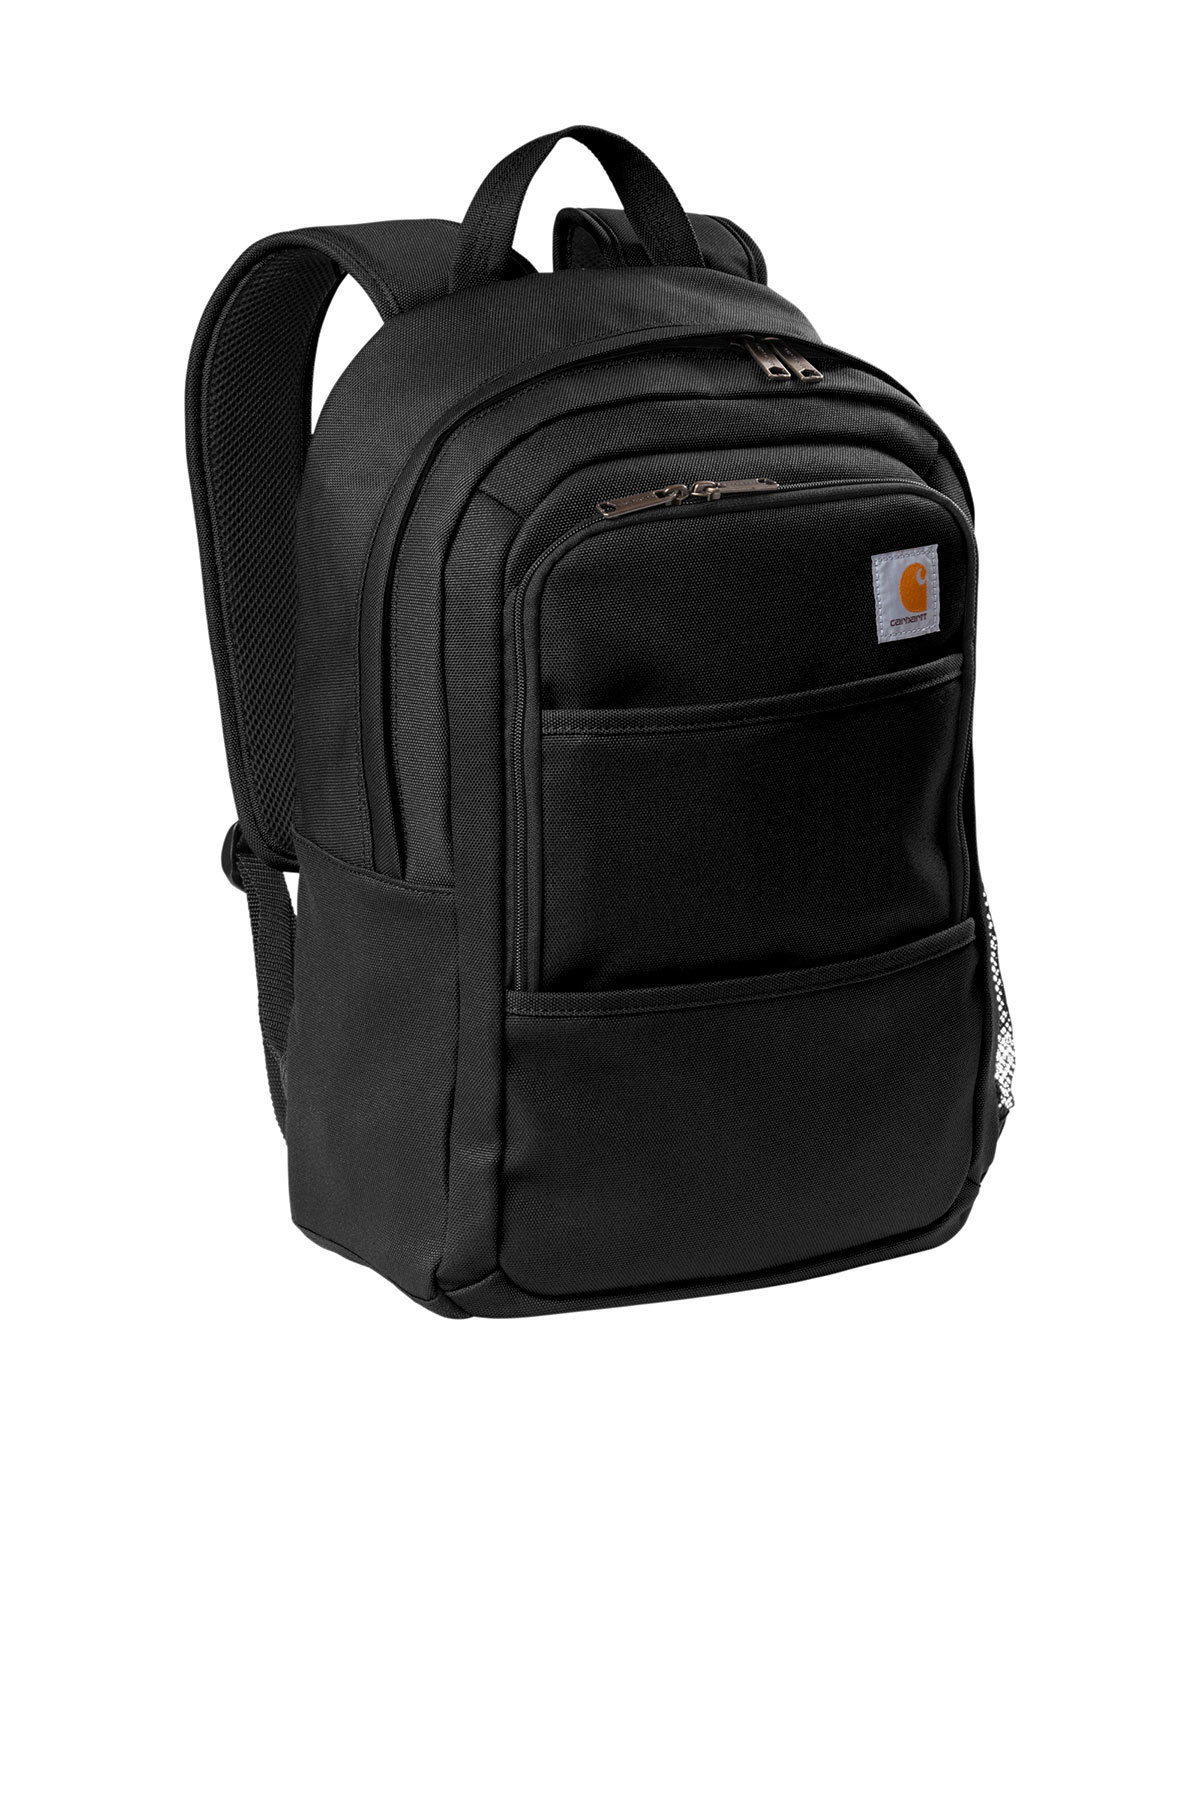 Carhartt Foundry Series Backpack | Product | Company Casuals